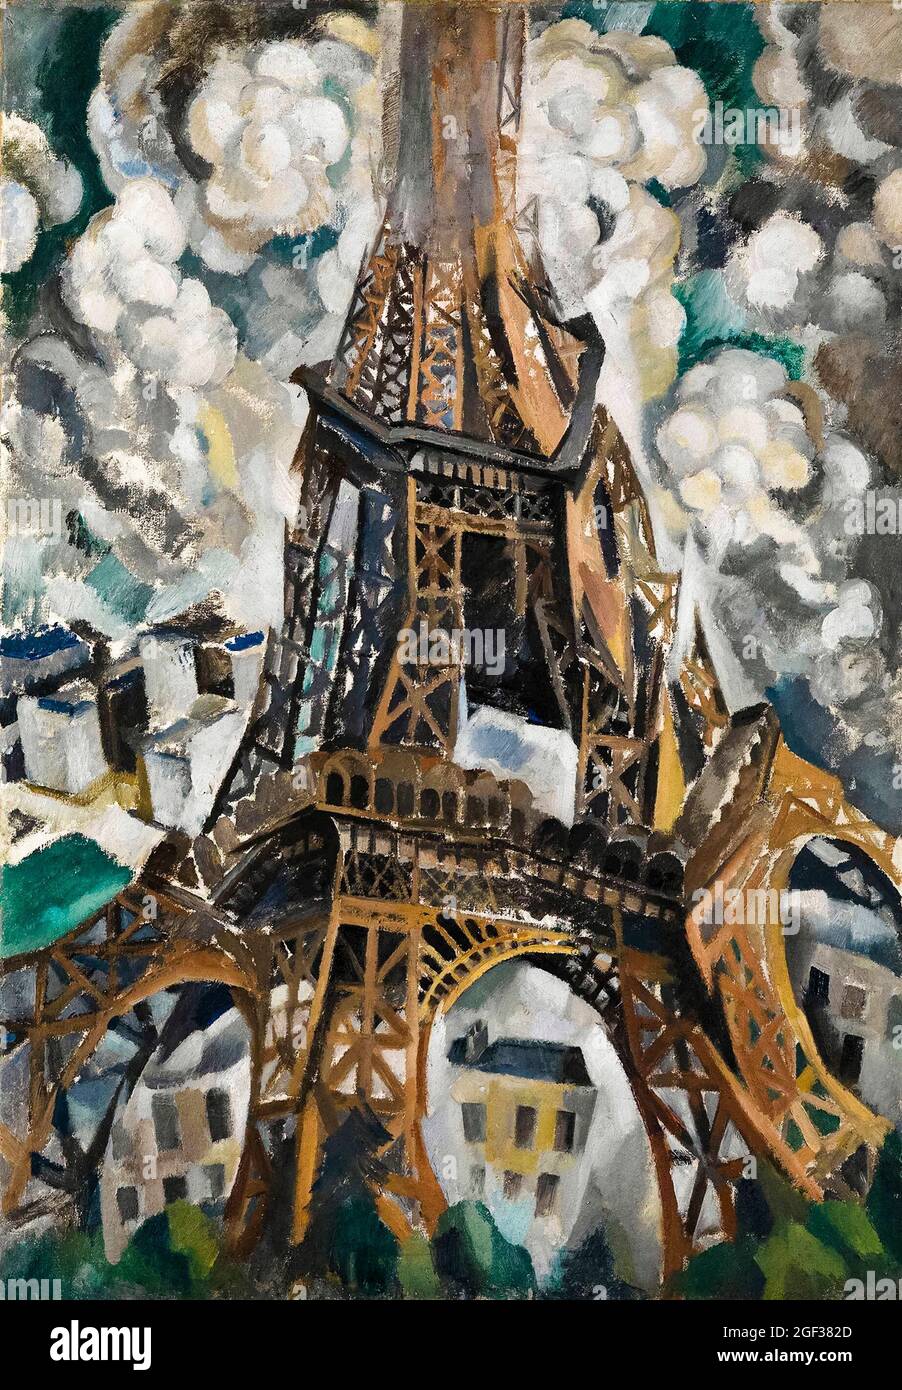 Robert Delaunay, abstract painting, The Eiffel Tower, 1909-1910 Stock Photo